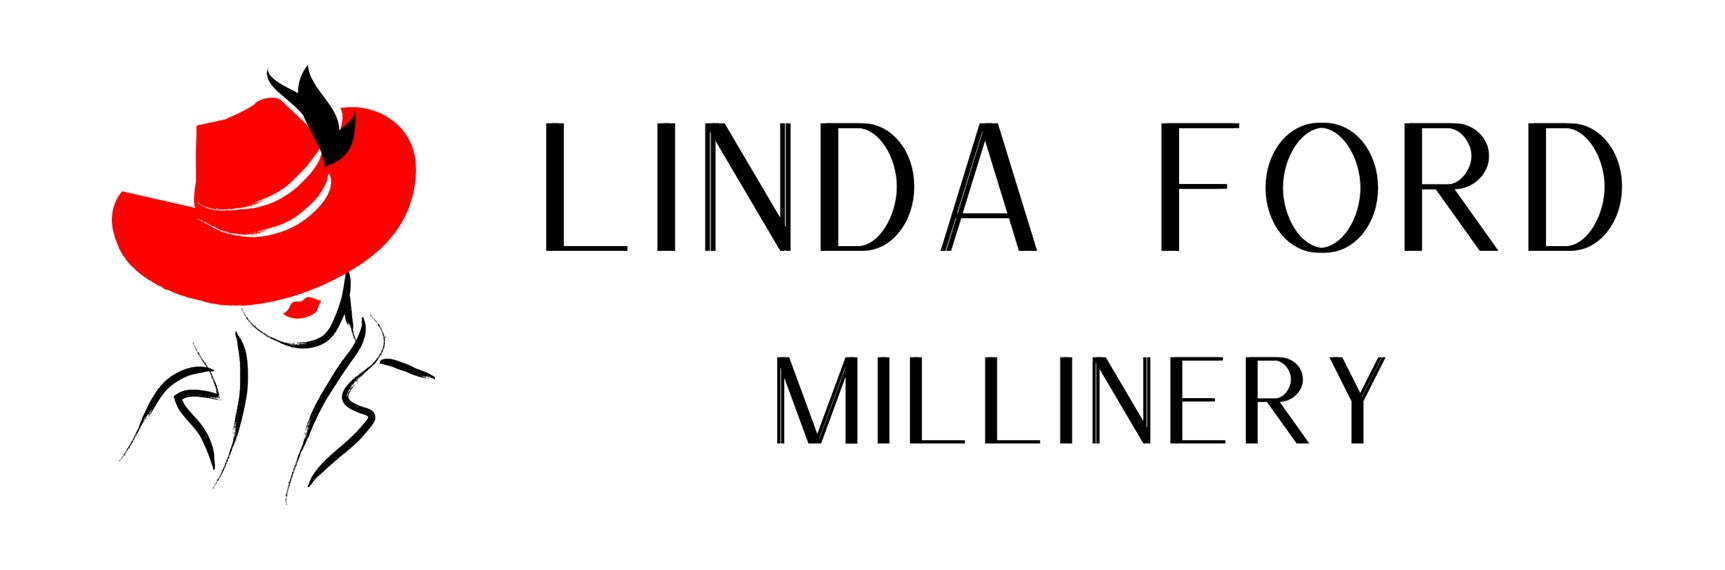 Linda Ford Millinery